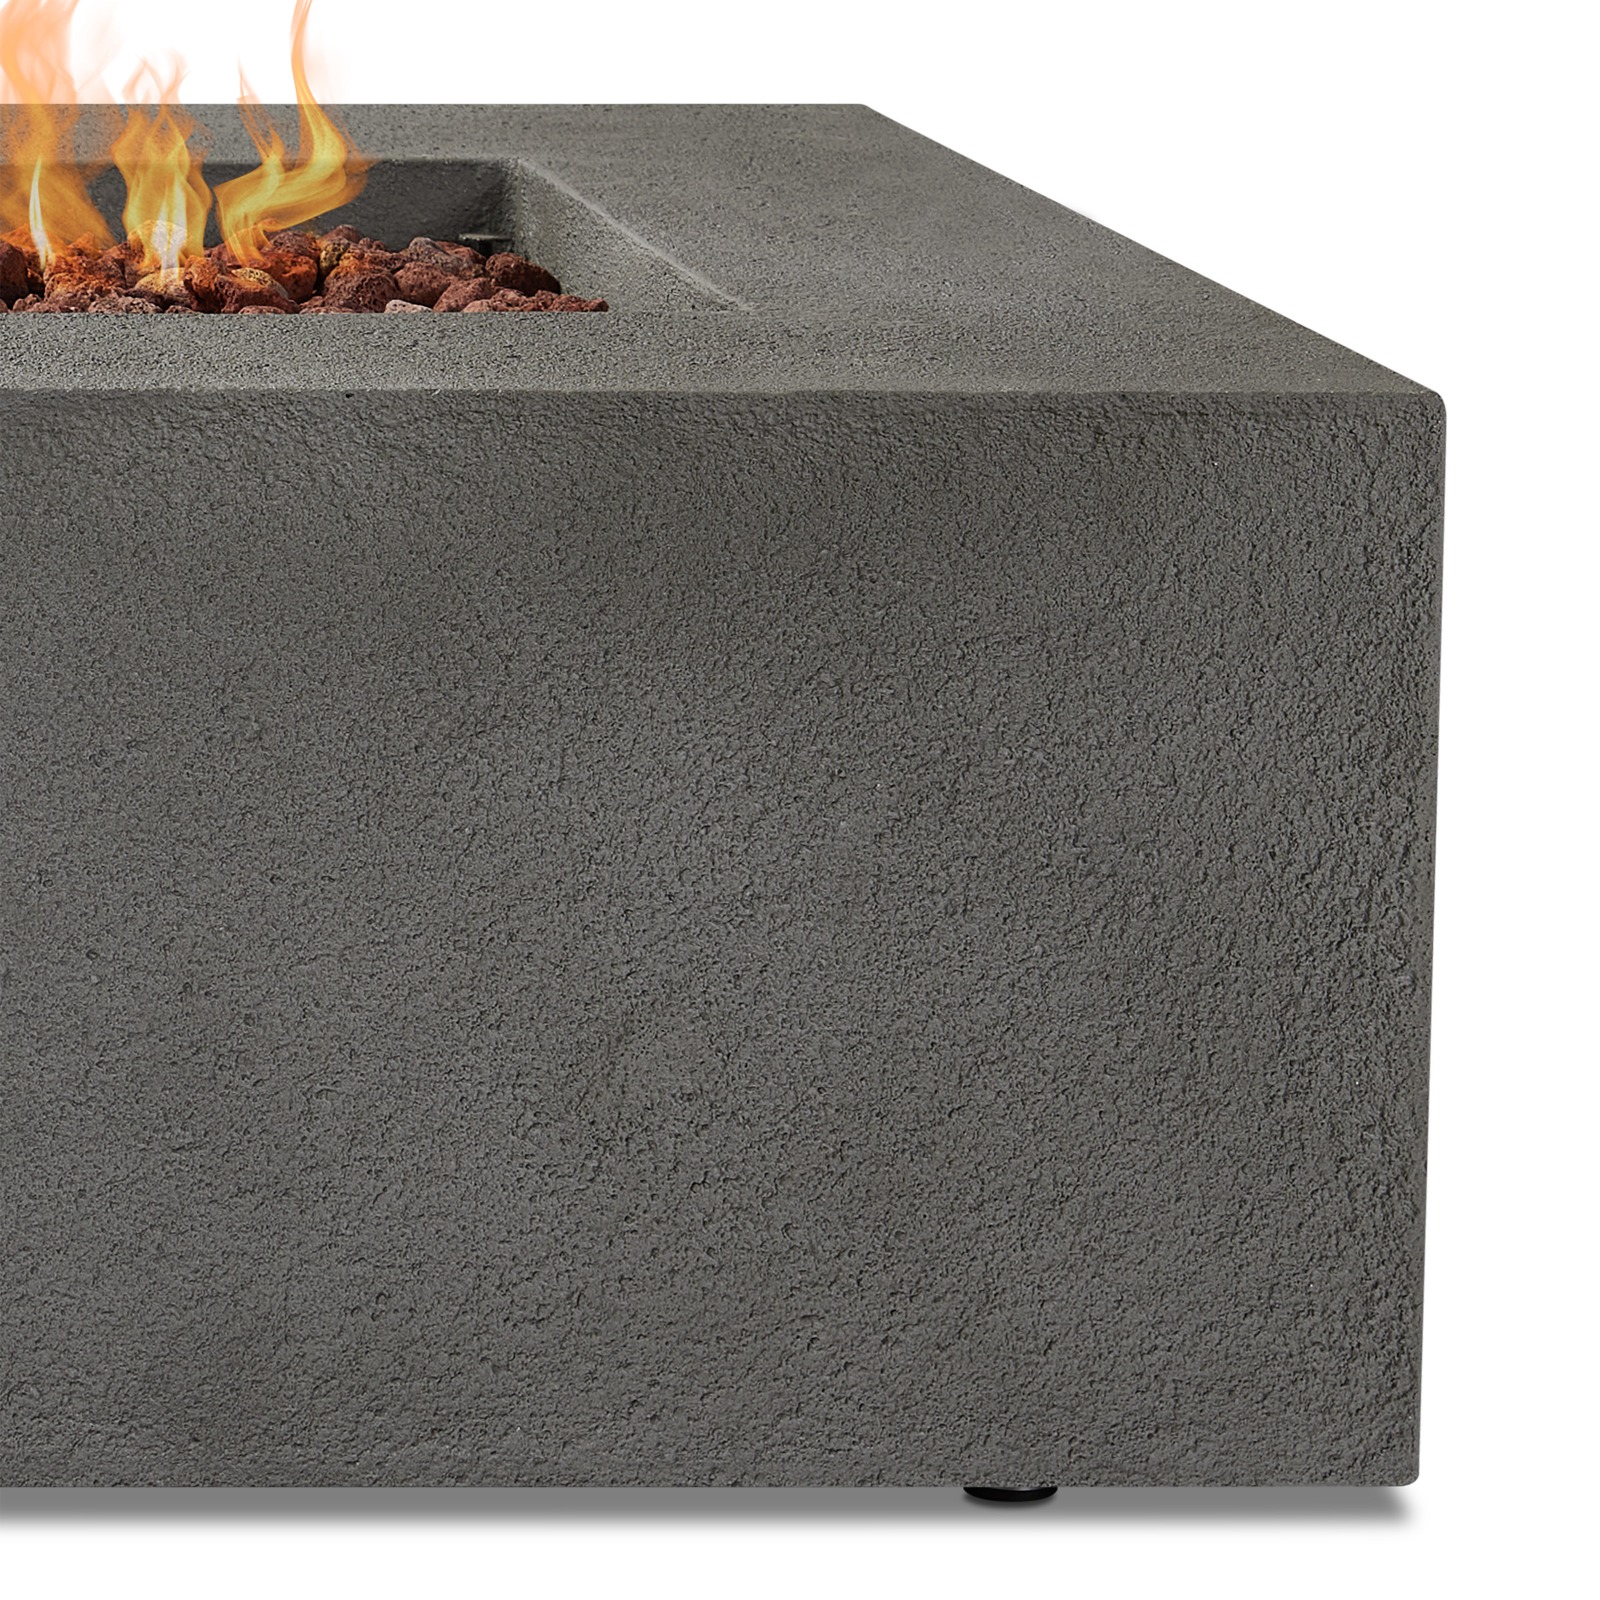 Baltic Rectangle MGO Concrete Gray Outdoor Fire Table Pit Fireplace